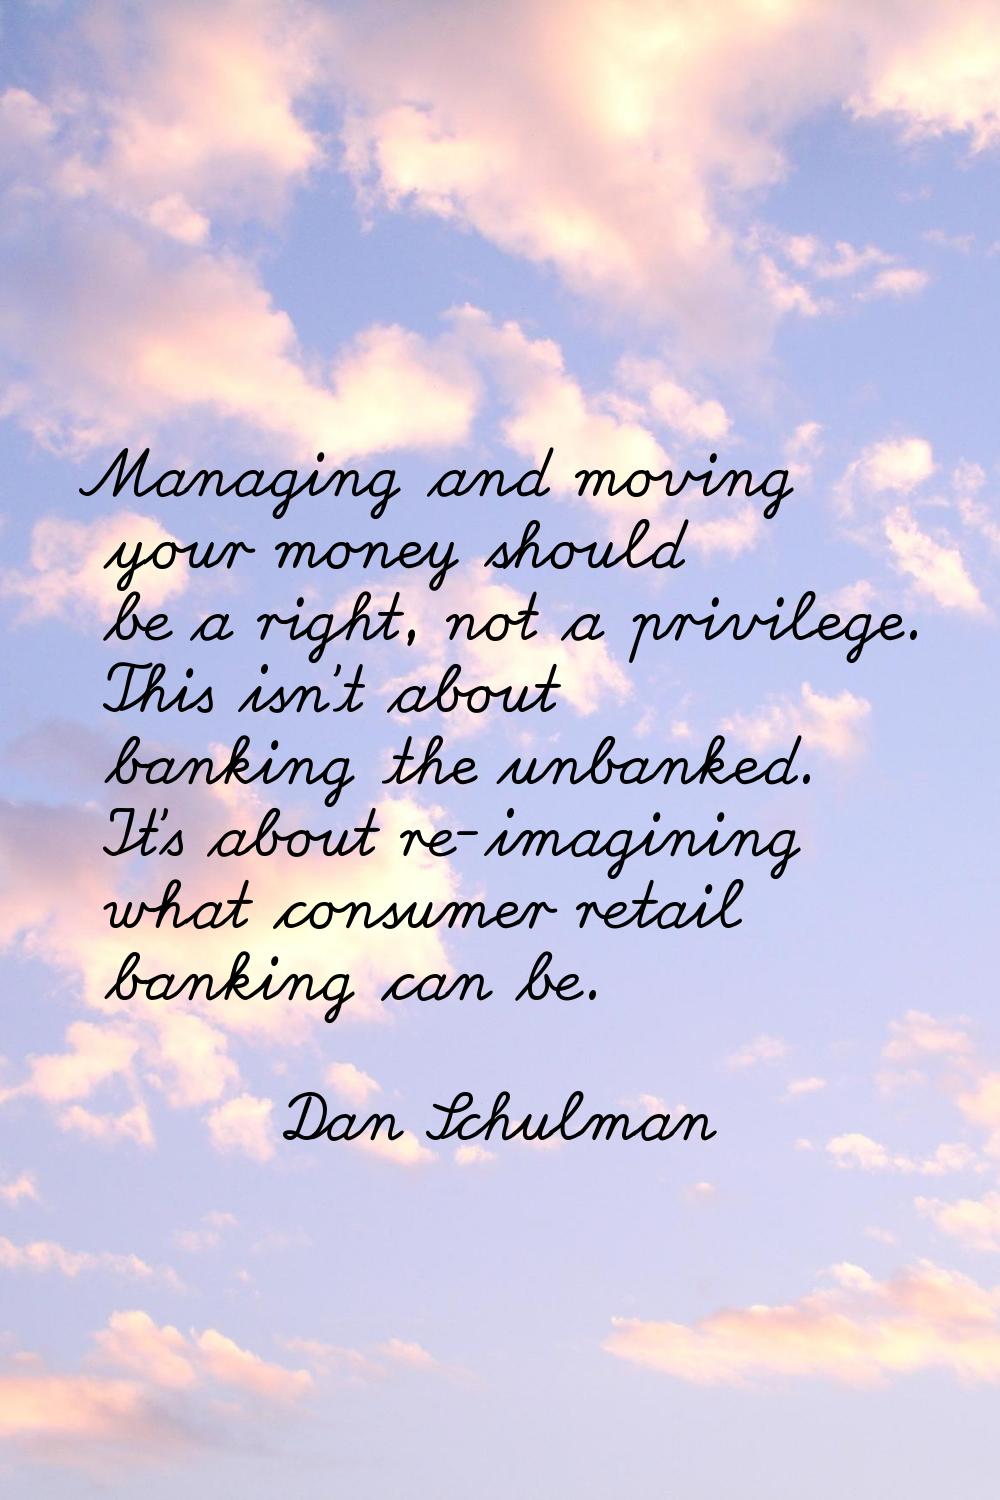 Managing and moving your money should be a right, not a privilege. This isn't about banking the unb